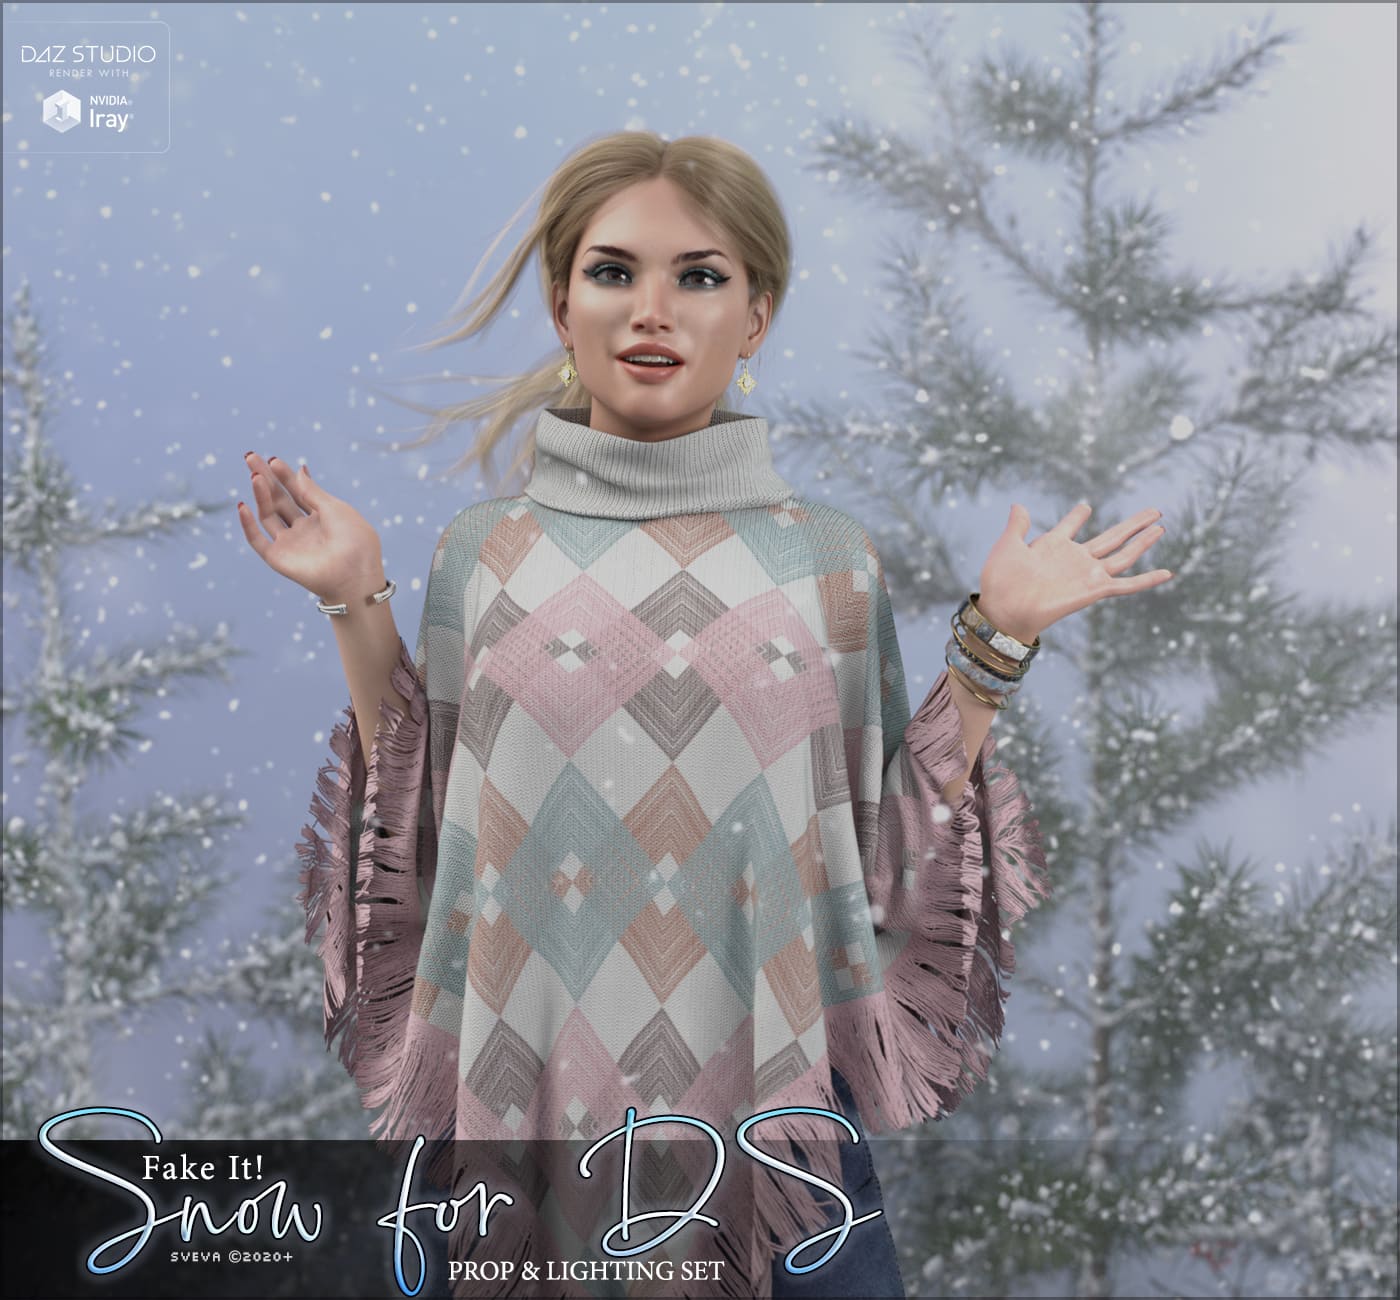 Fake It! Snow for DS_DAZ3DDL